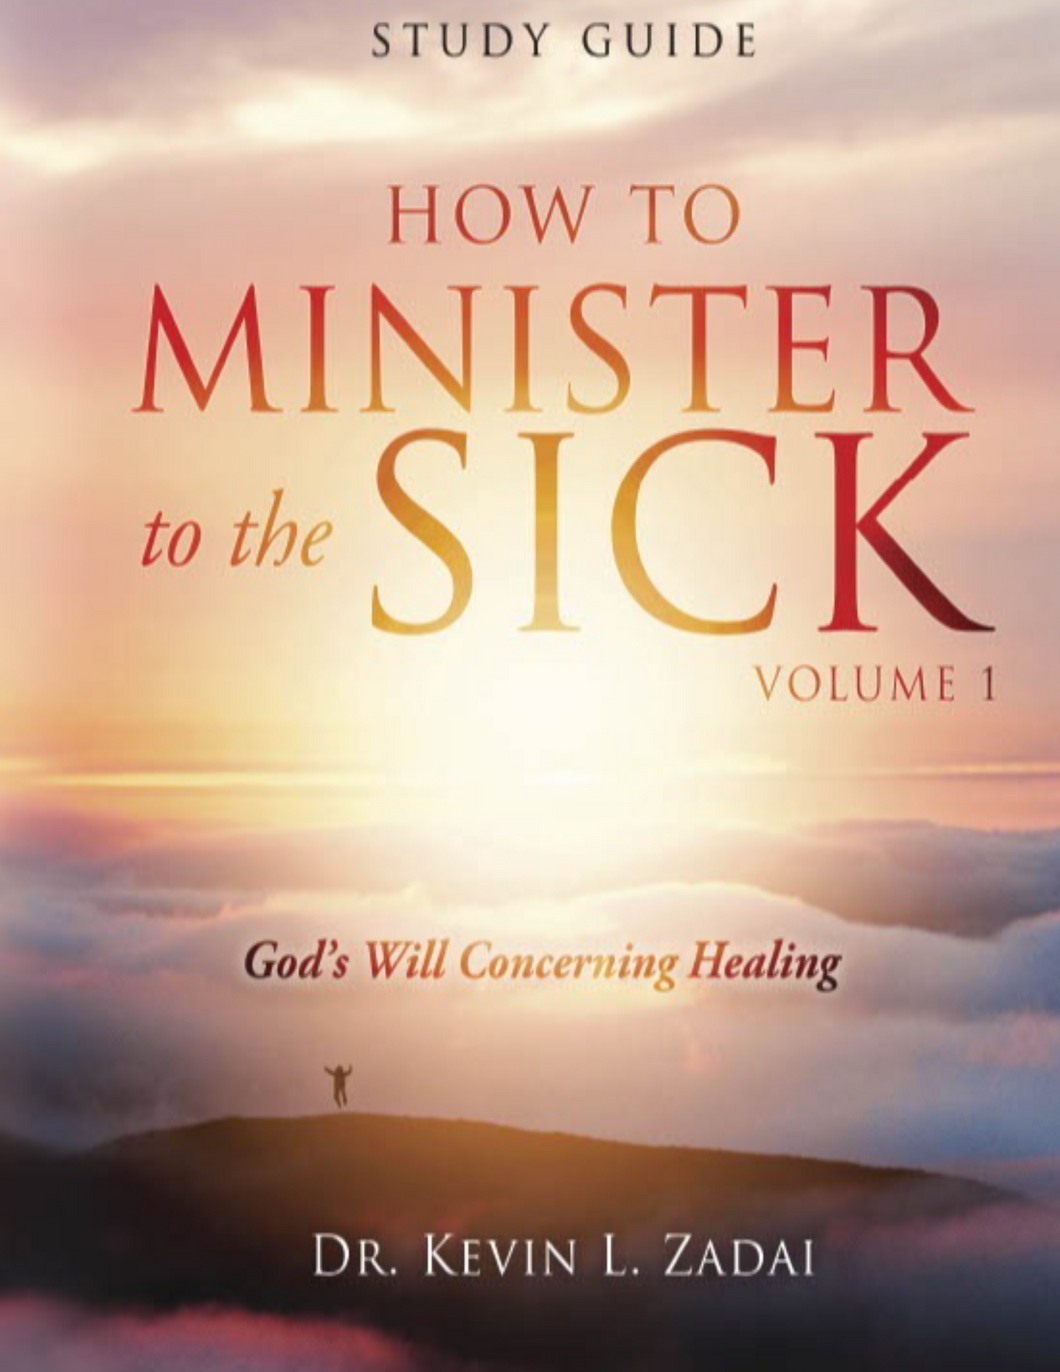 How to Minister to the Sick: Vol 1  - Study Guide